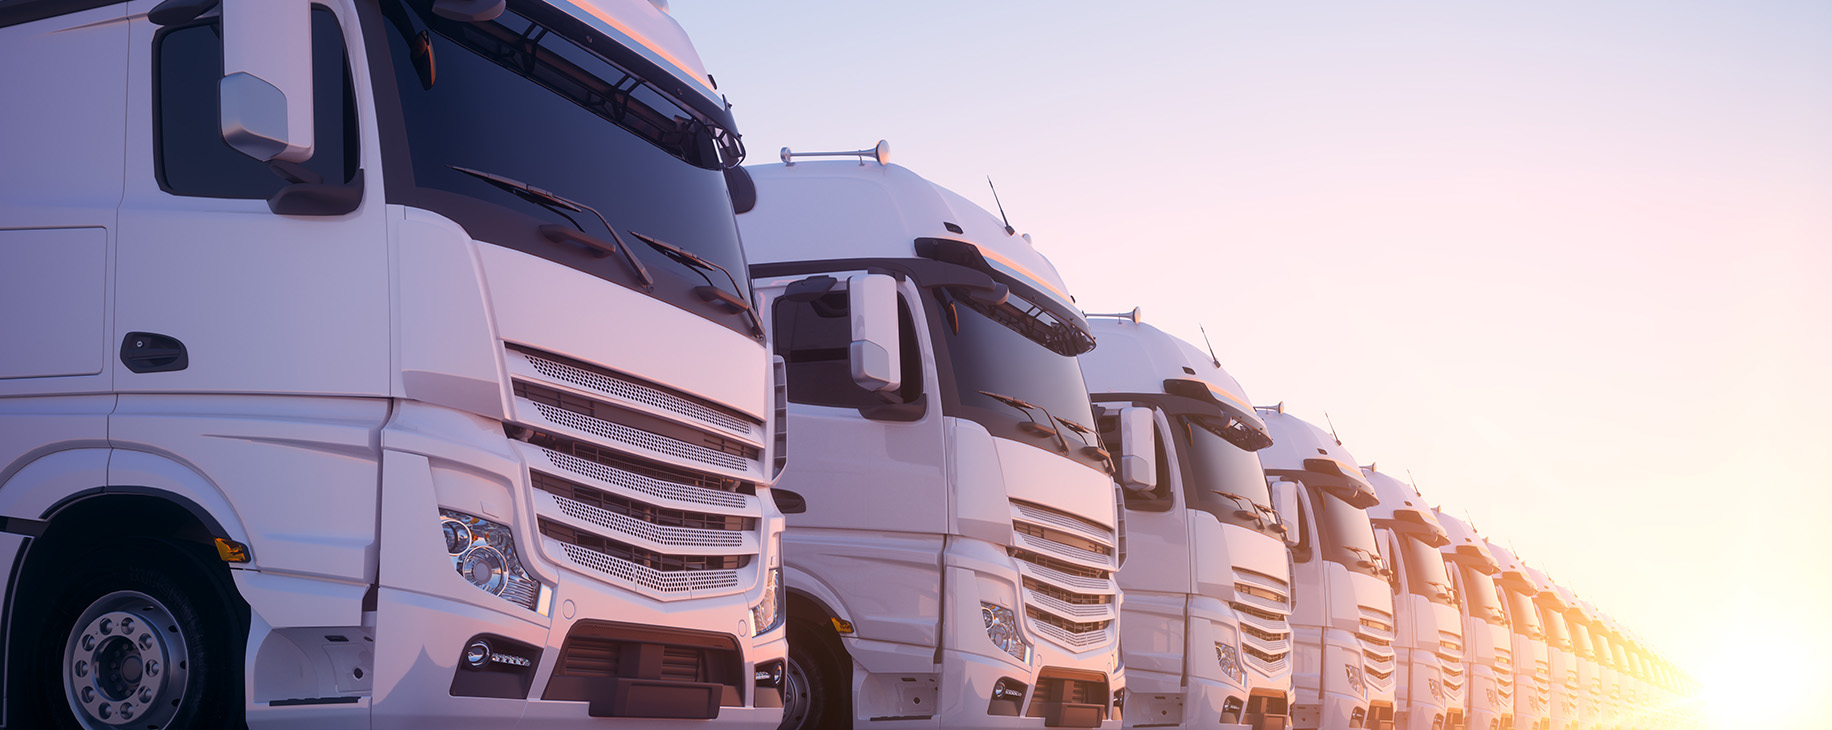 Image of HGVs all in a line